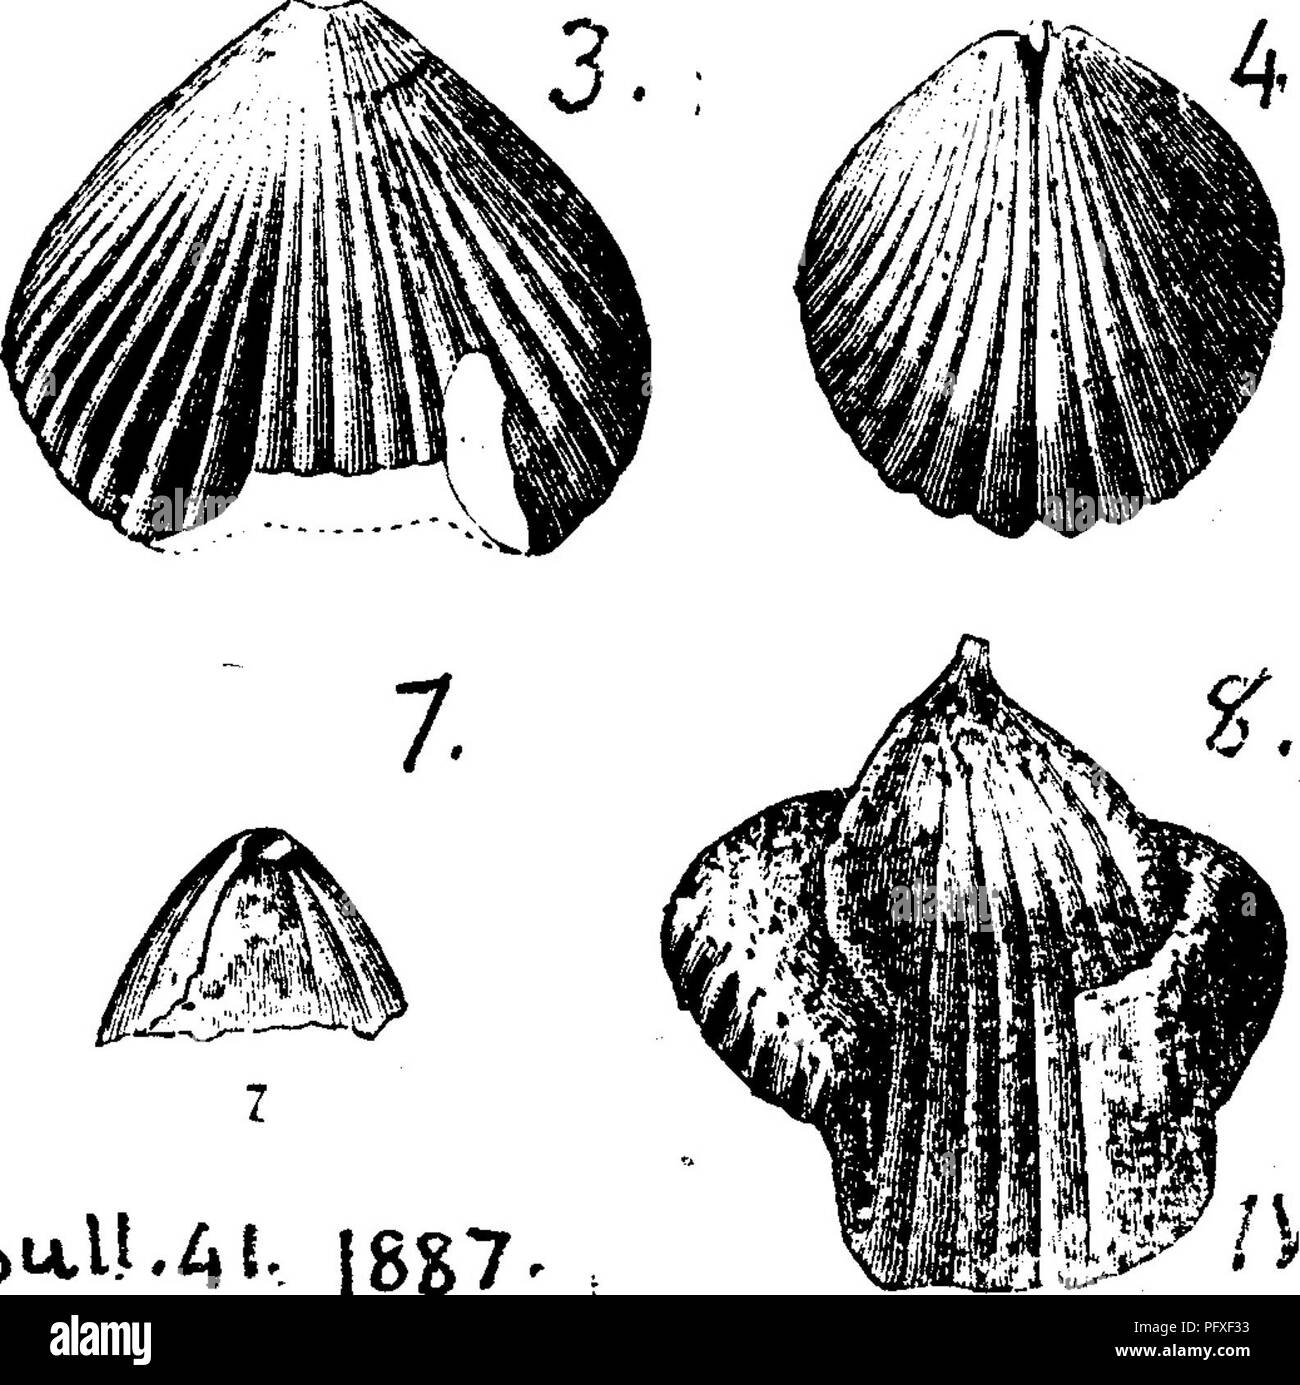 . A dictionary of the fossils of Pennsylvania and neighboring states named in the reports and catalogues of the survey ... Paleontology. 41, U. S. Geol. Sur. 1887, page 87, plate 4, fig. 1, dorsal view of interior impression; 2, side view of same; 3, gutta percha cast of ventral valve; 4, dorsal interior of another specimen; 5, side of same; 6, ventral interior impression; 7, showing delti- dium, beak and foramen, gutta percha cast; 8, impression, somewhat distorted, of inside of ventral valve. All from Sub-Olean ^{Ferruginous sandstone) conglomerate formation (top of PoGono)^,2ii Little Genes Stock Photo